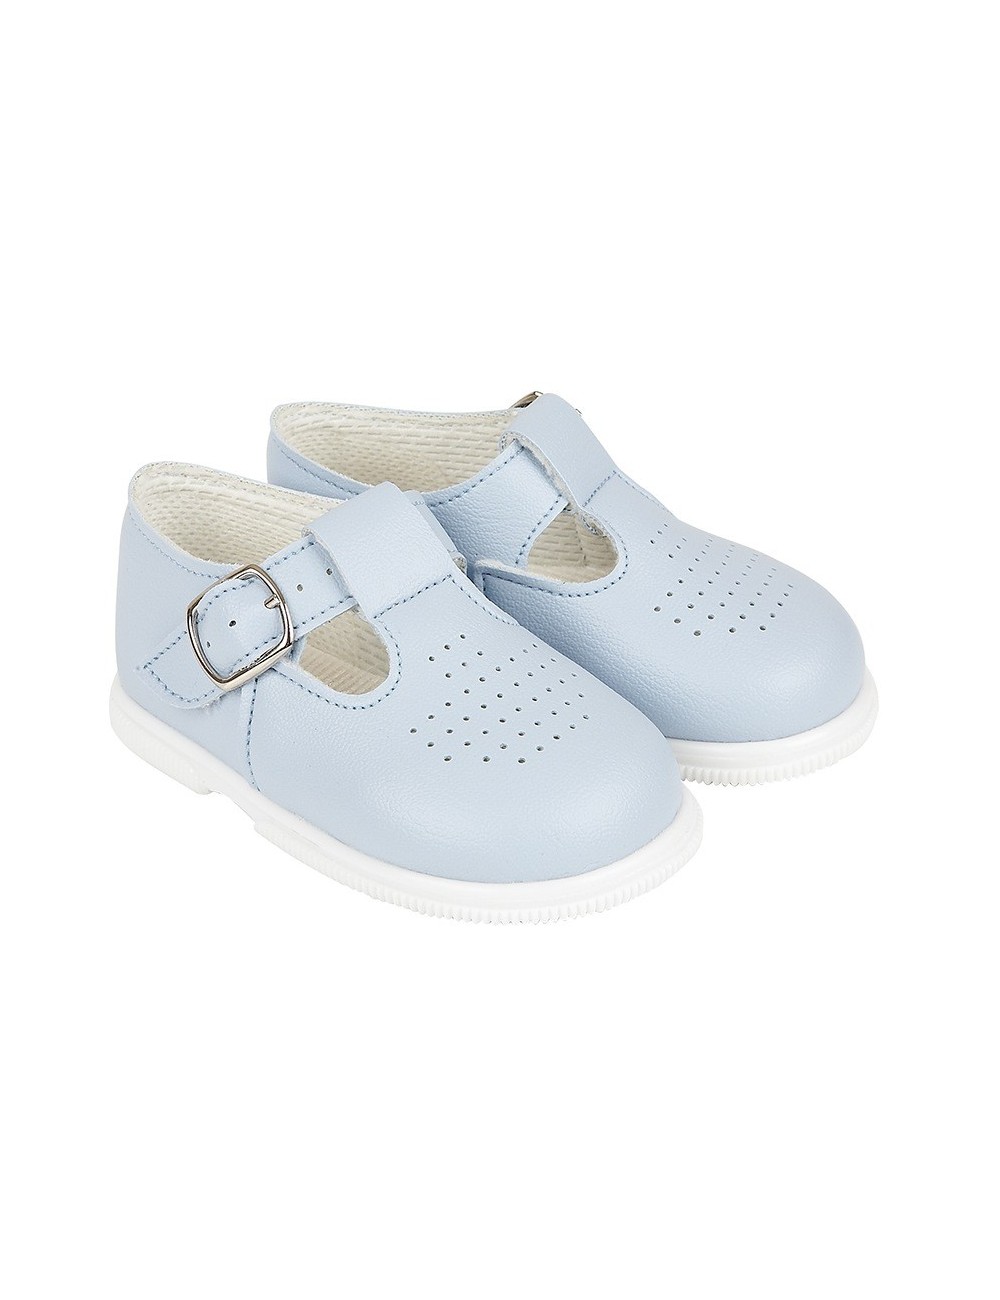 BABY GIRL HARD SOLED SPANISH SHOES WITH BUCKLE FASTENING 